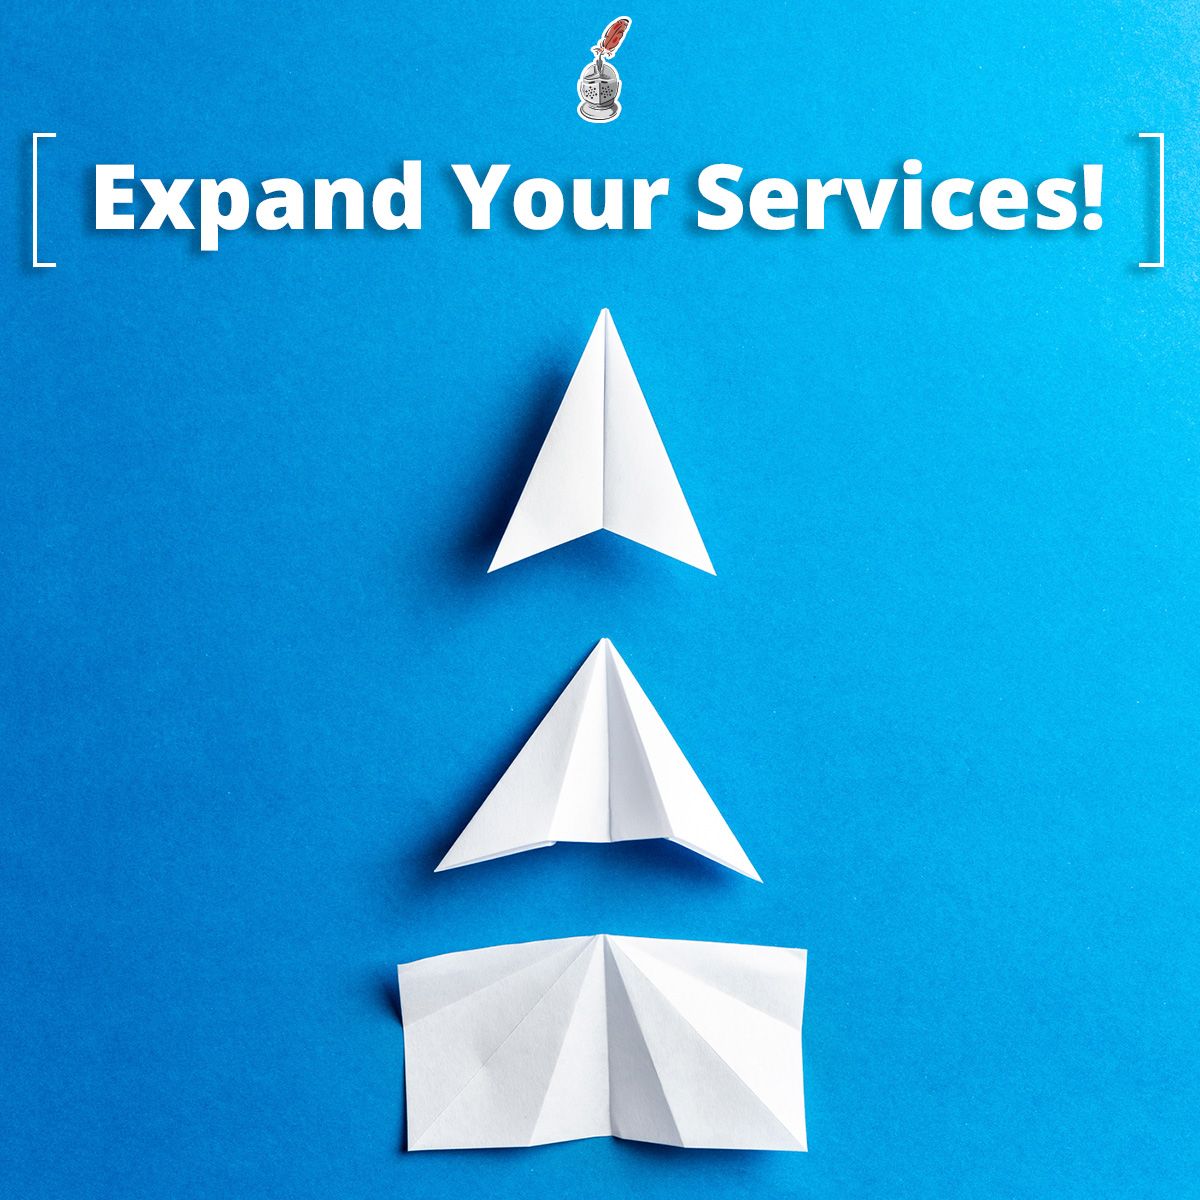 Expand Your Services!